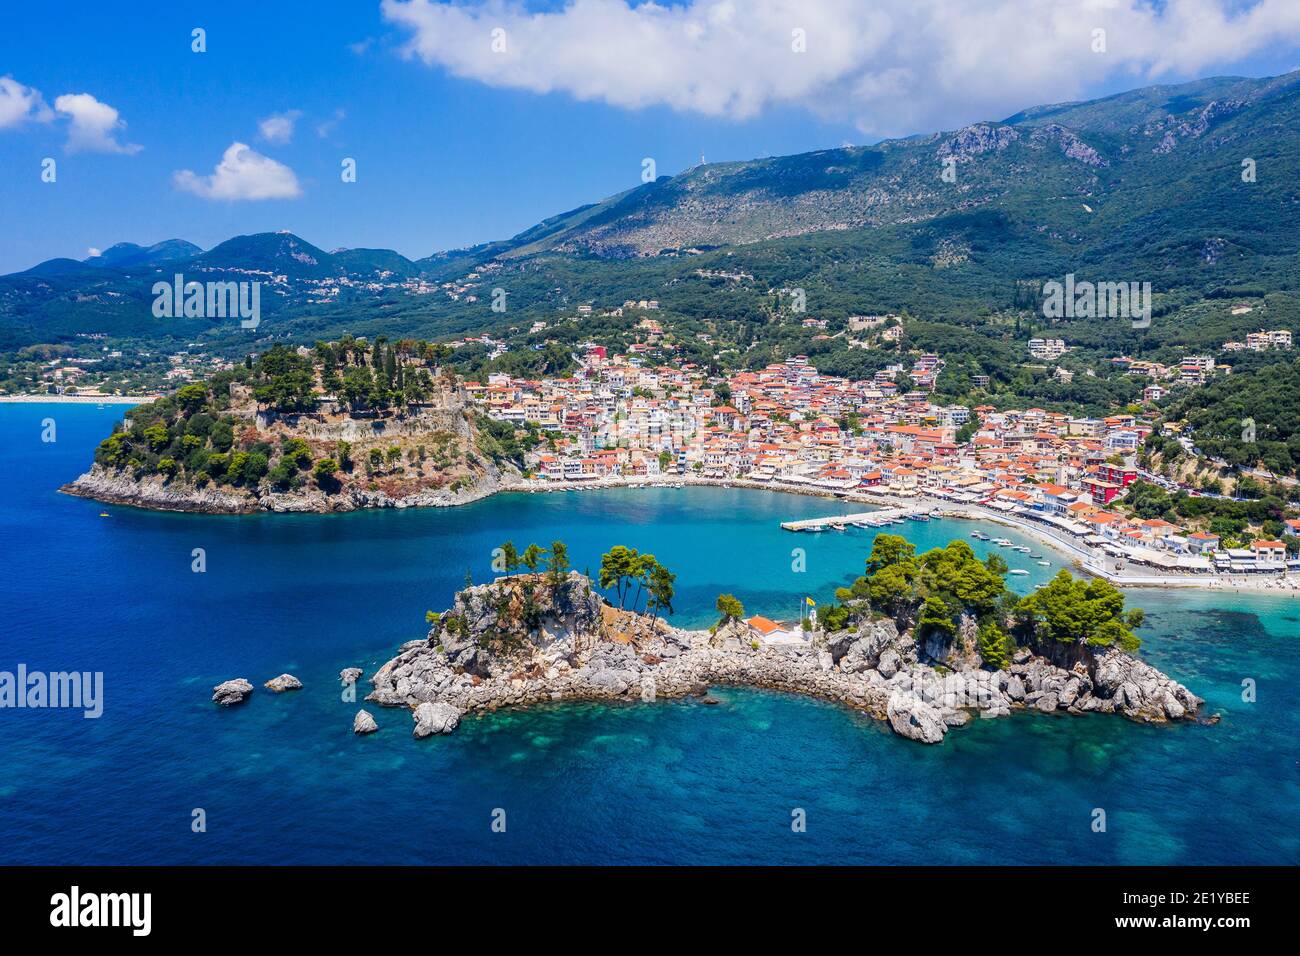 Parga, Greece. Aerial view of the resort town and island of Panagia. Stock Photo